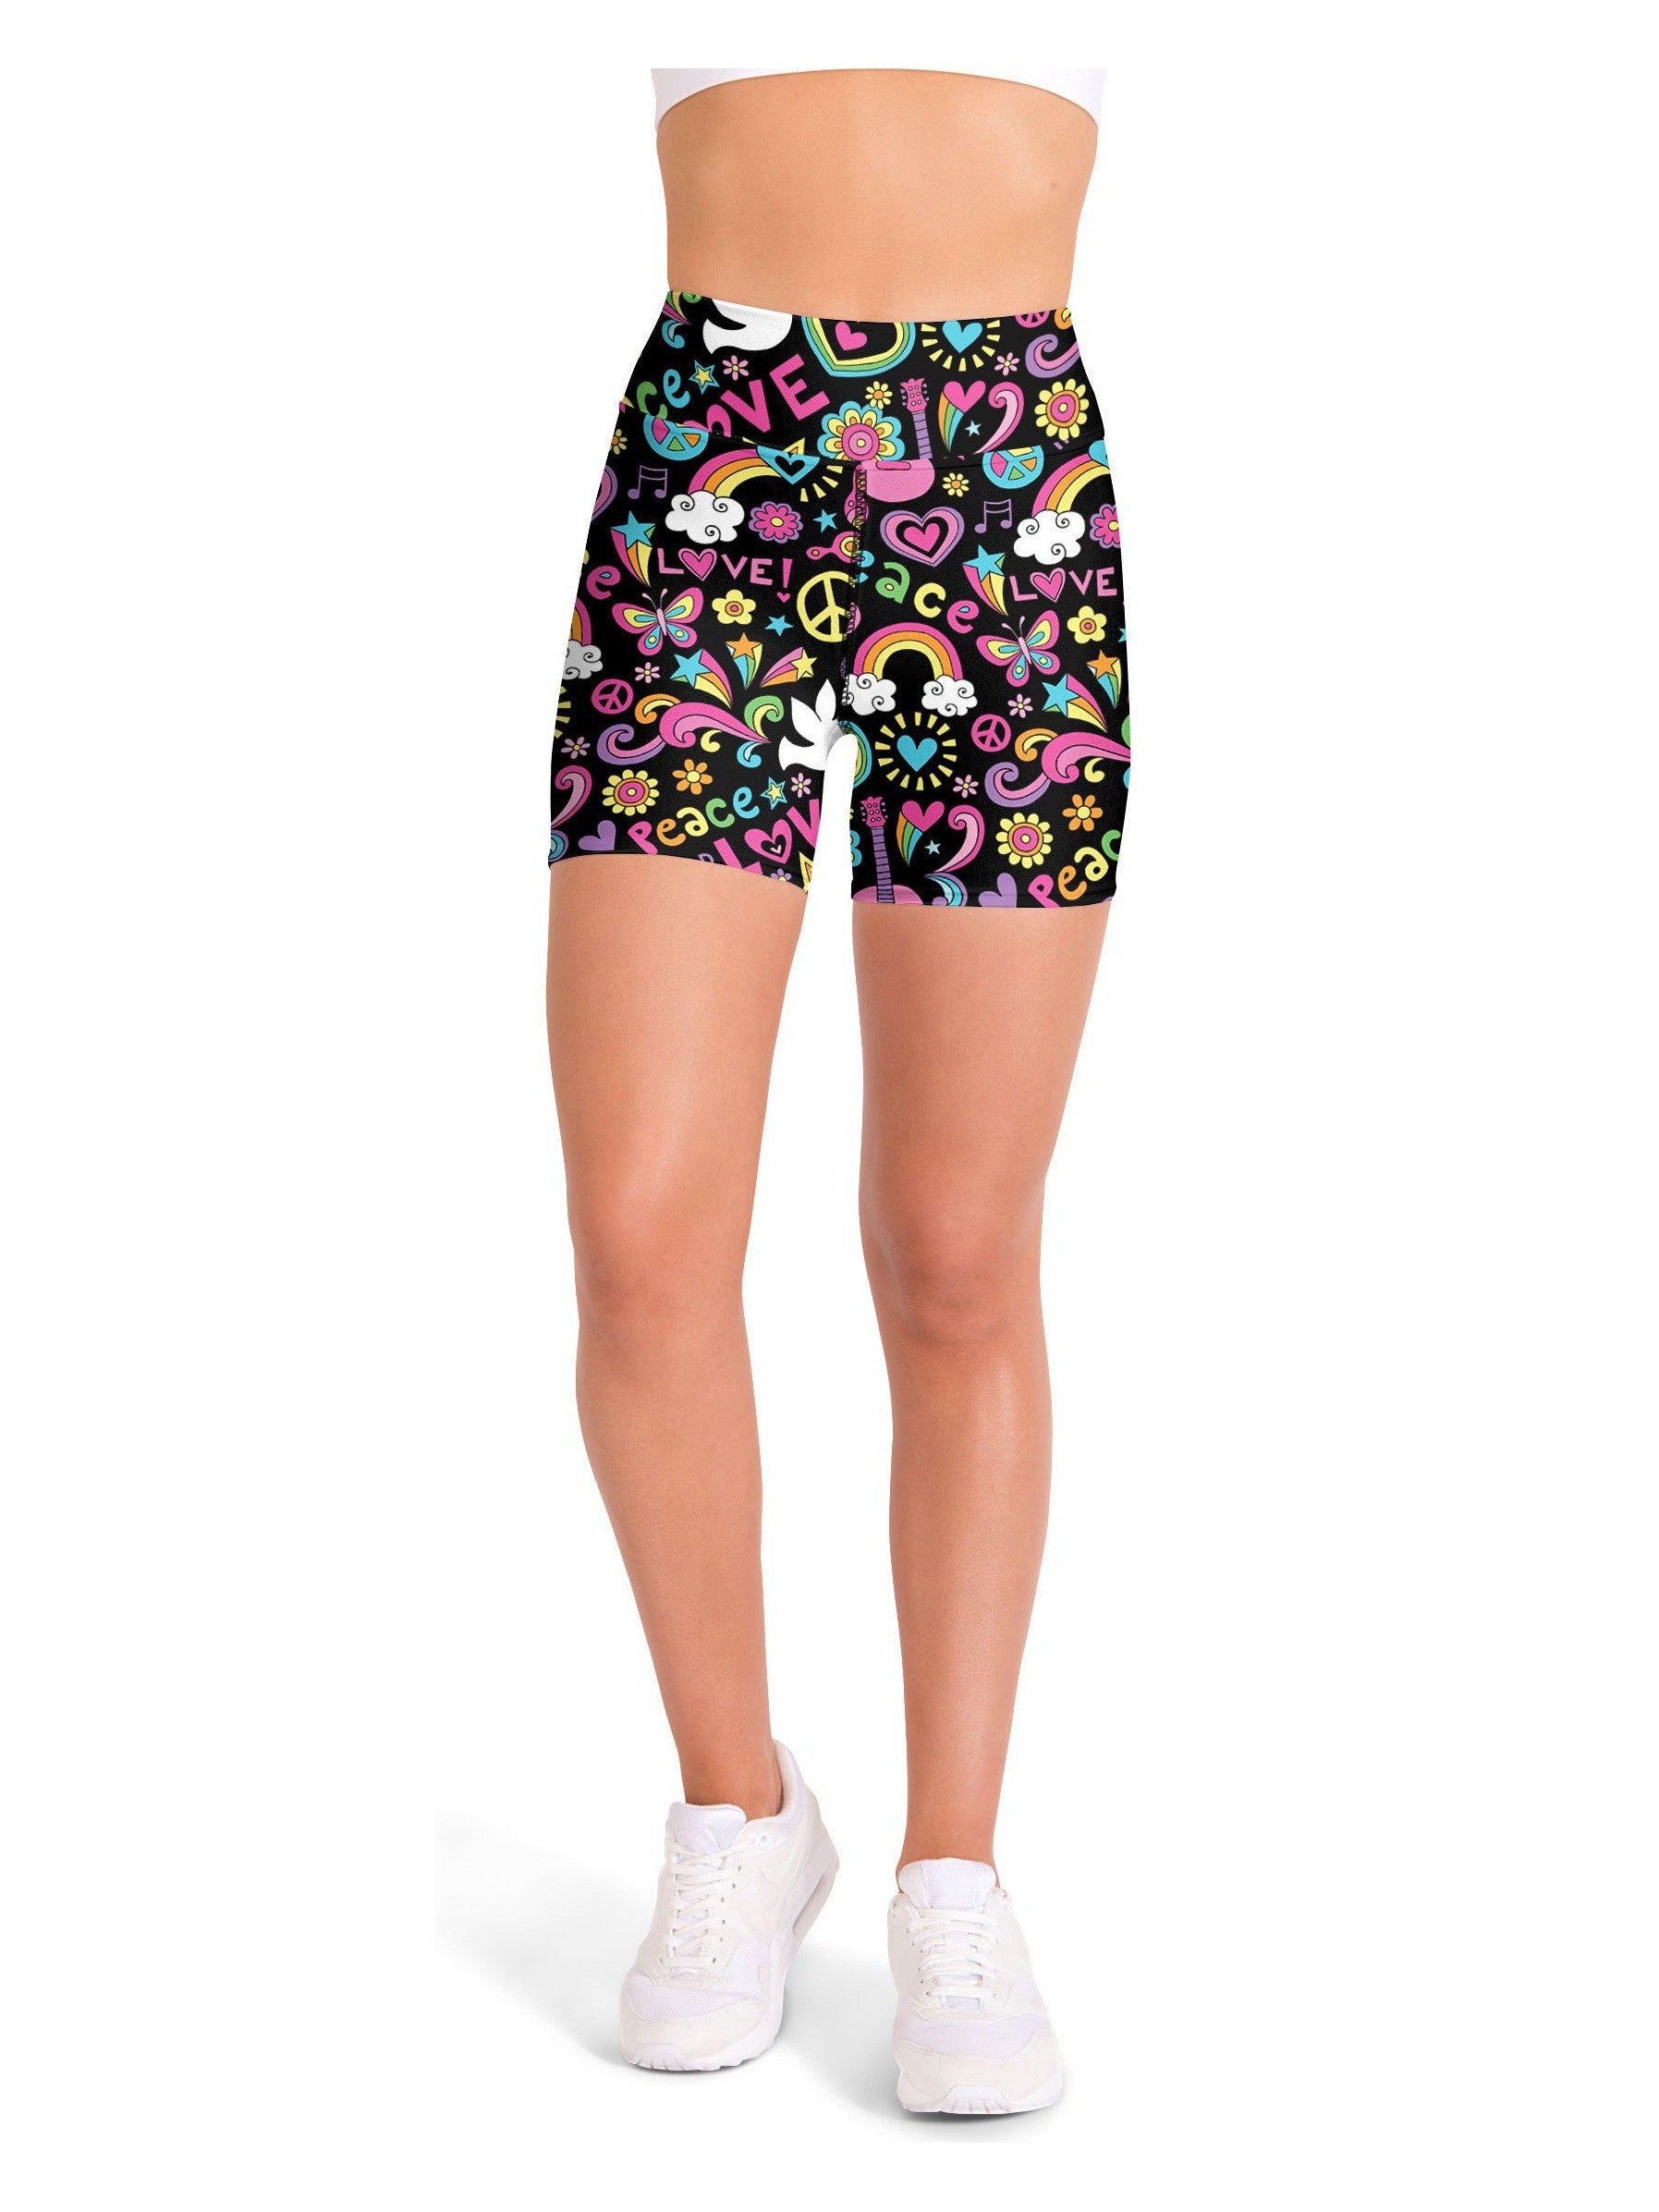 Peace and Love Yoga Shorts Geabunch